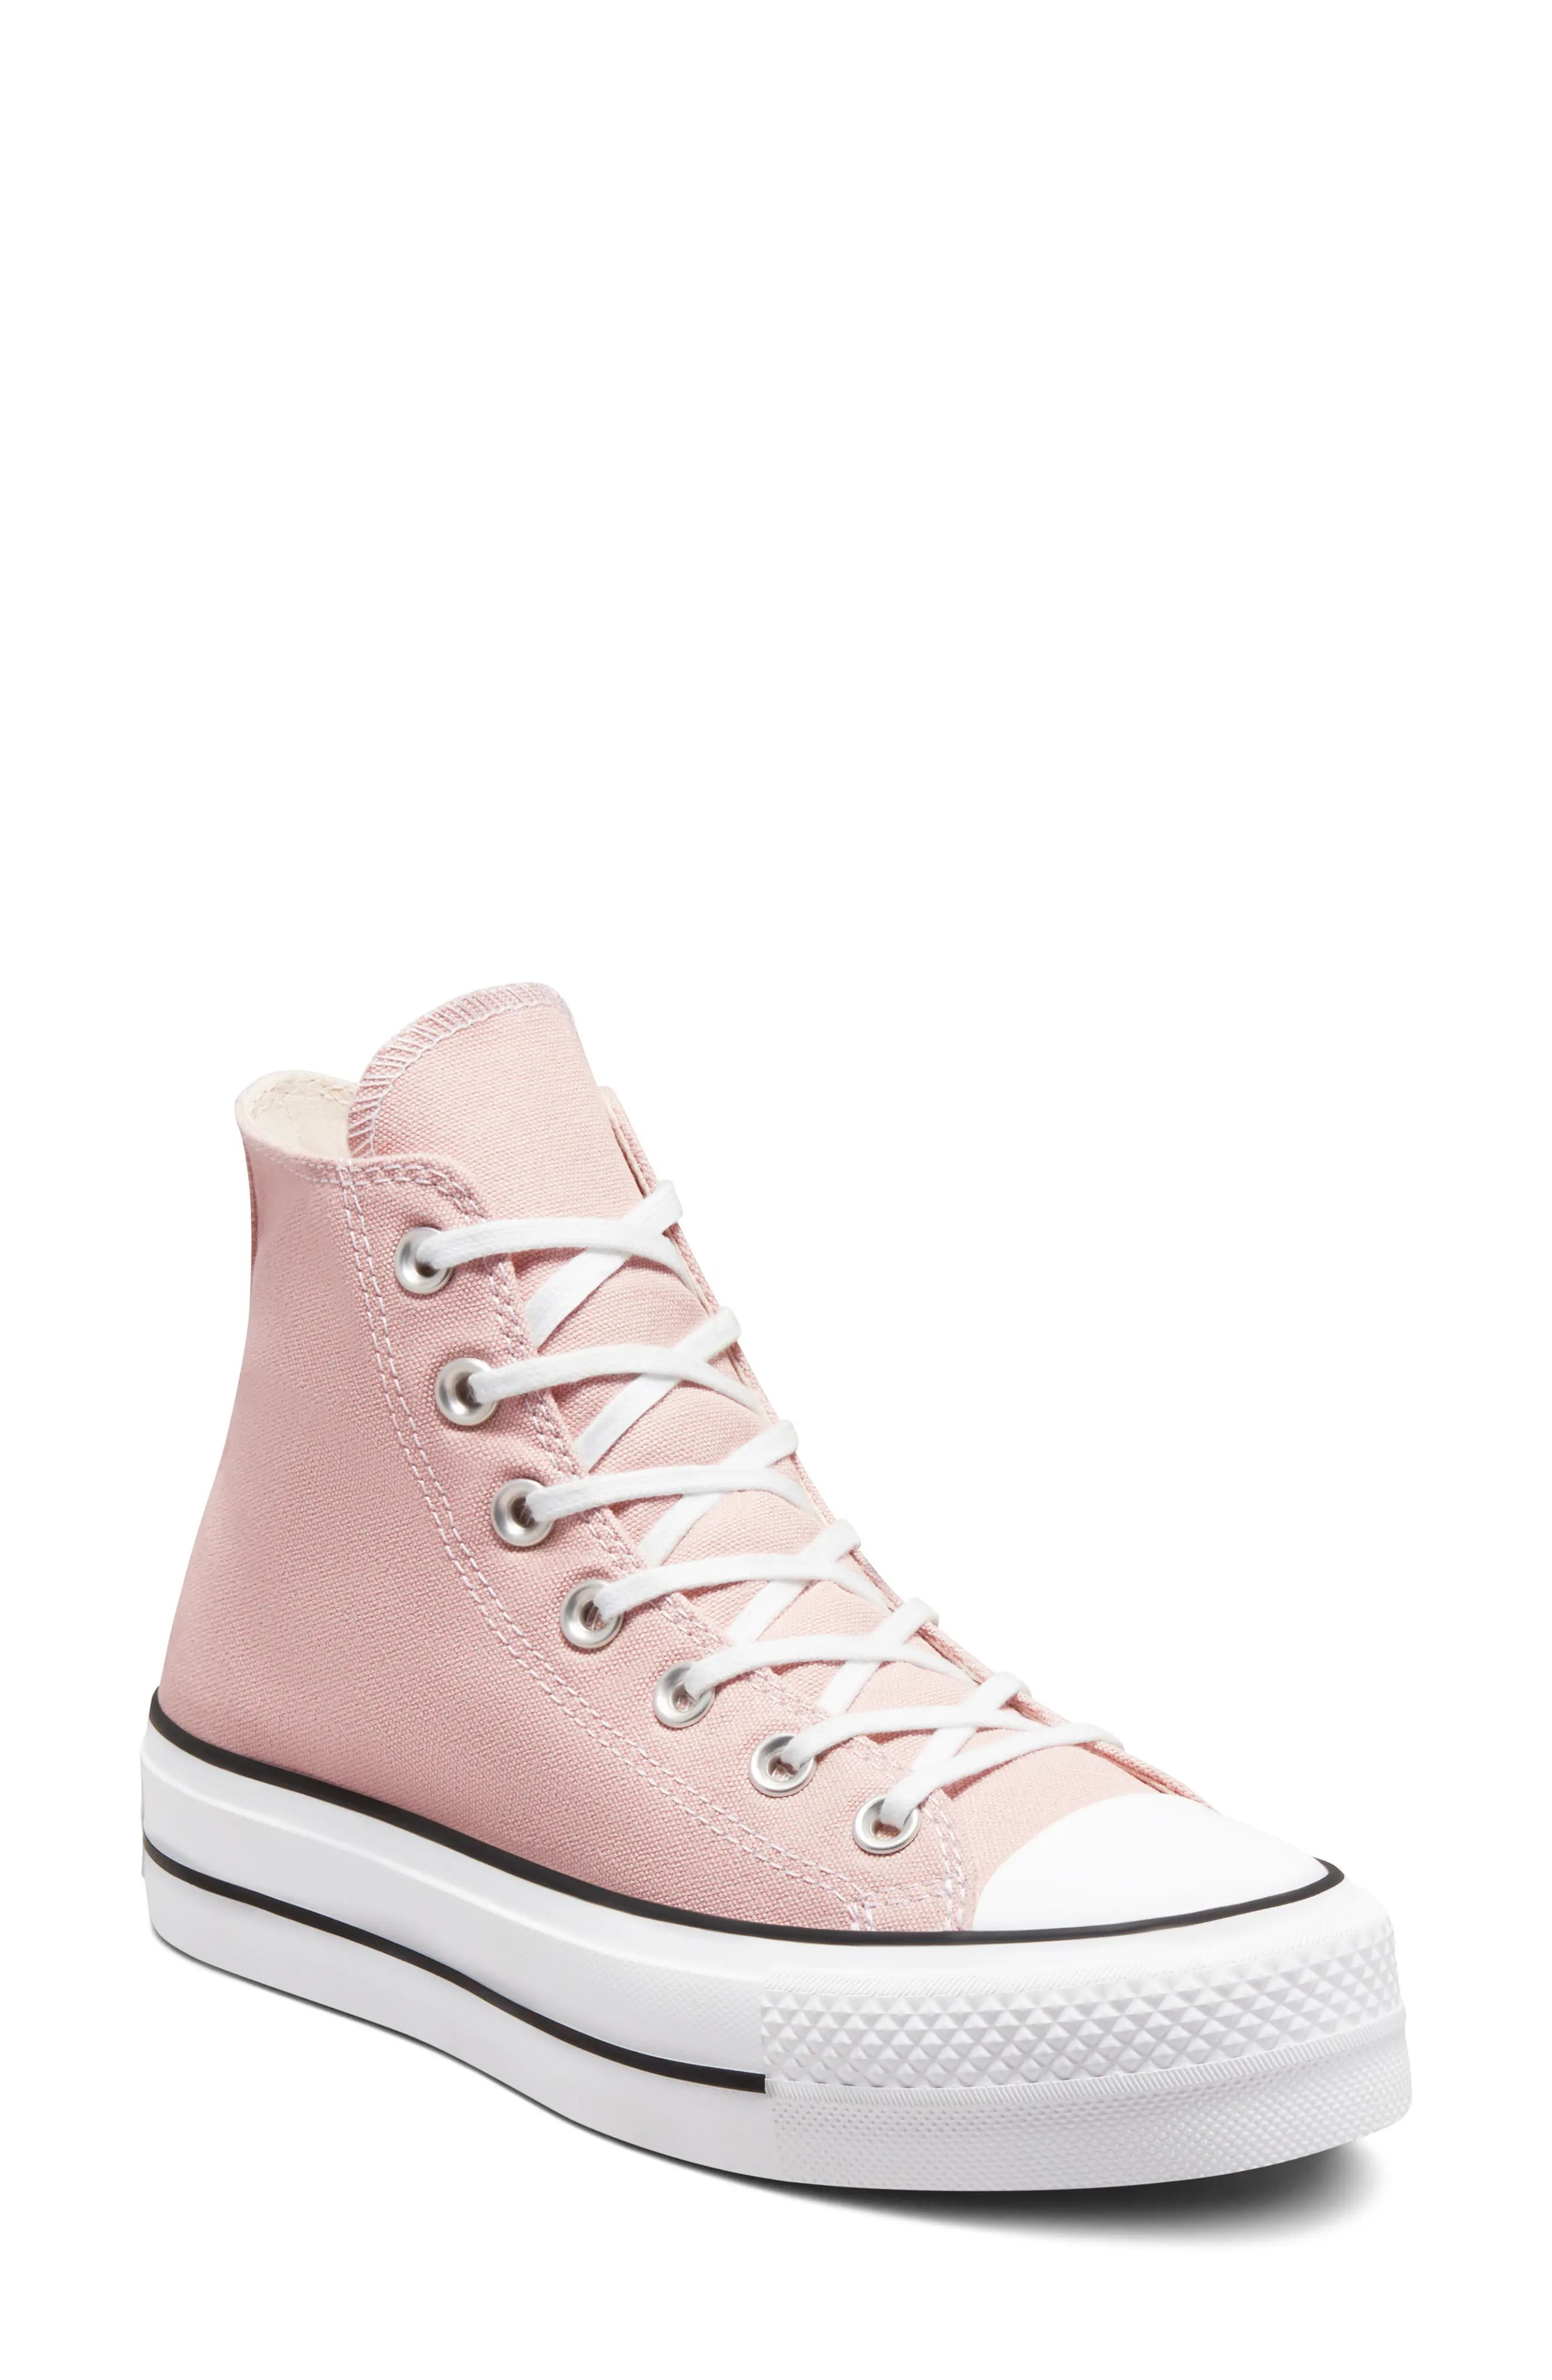 Converse Chuck Taylor(R) All Star(R) Lift High Top Platform Sneaker in Pink Clay/Black/White at Nord | Nordstrom